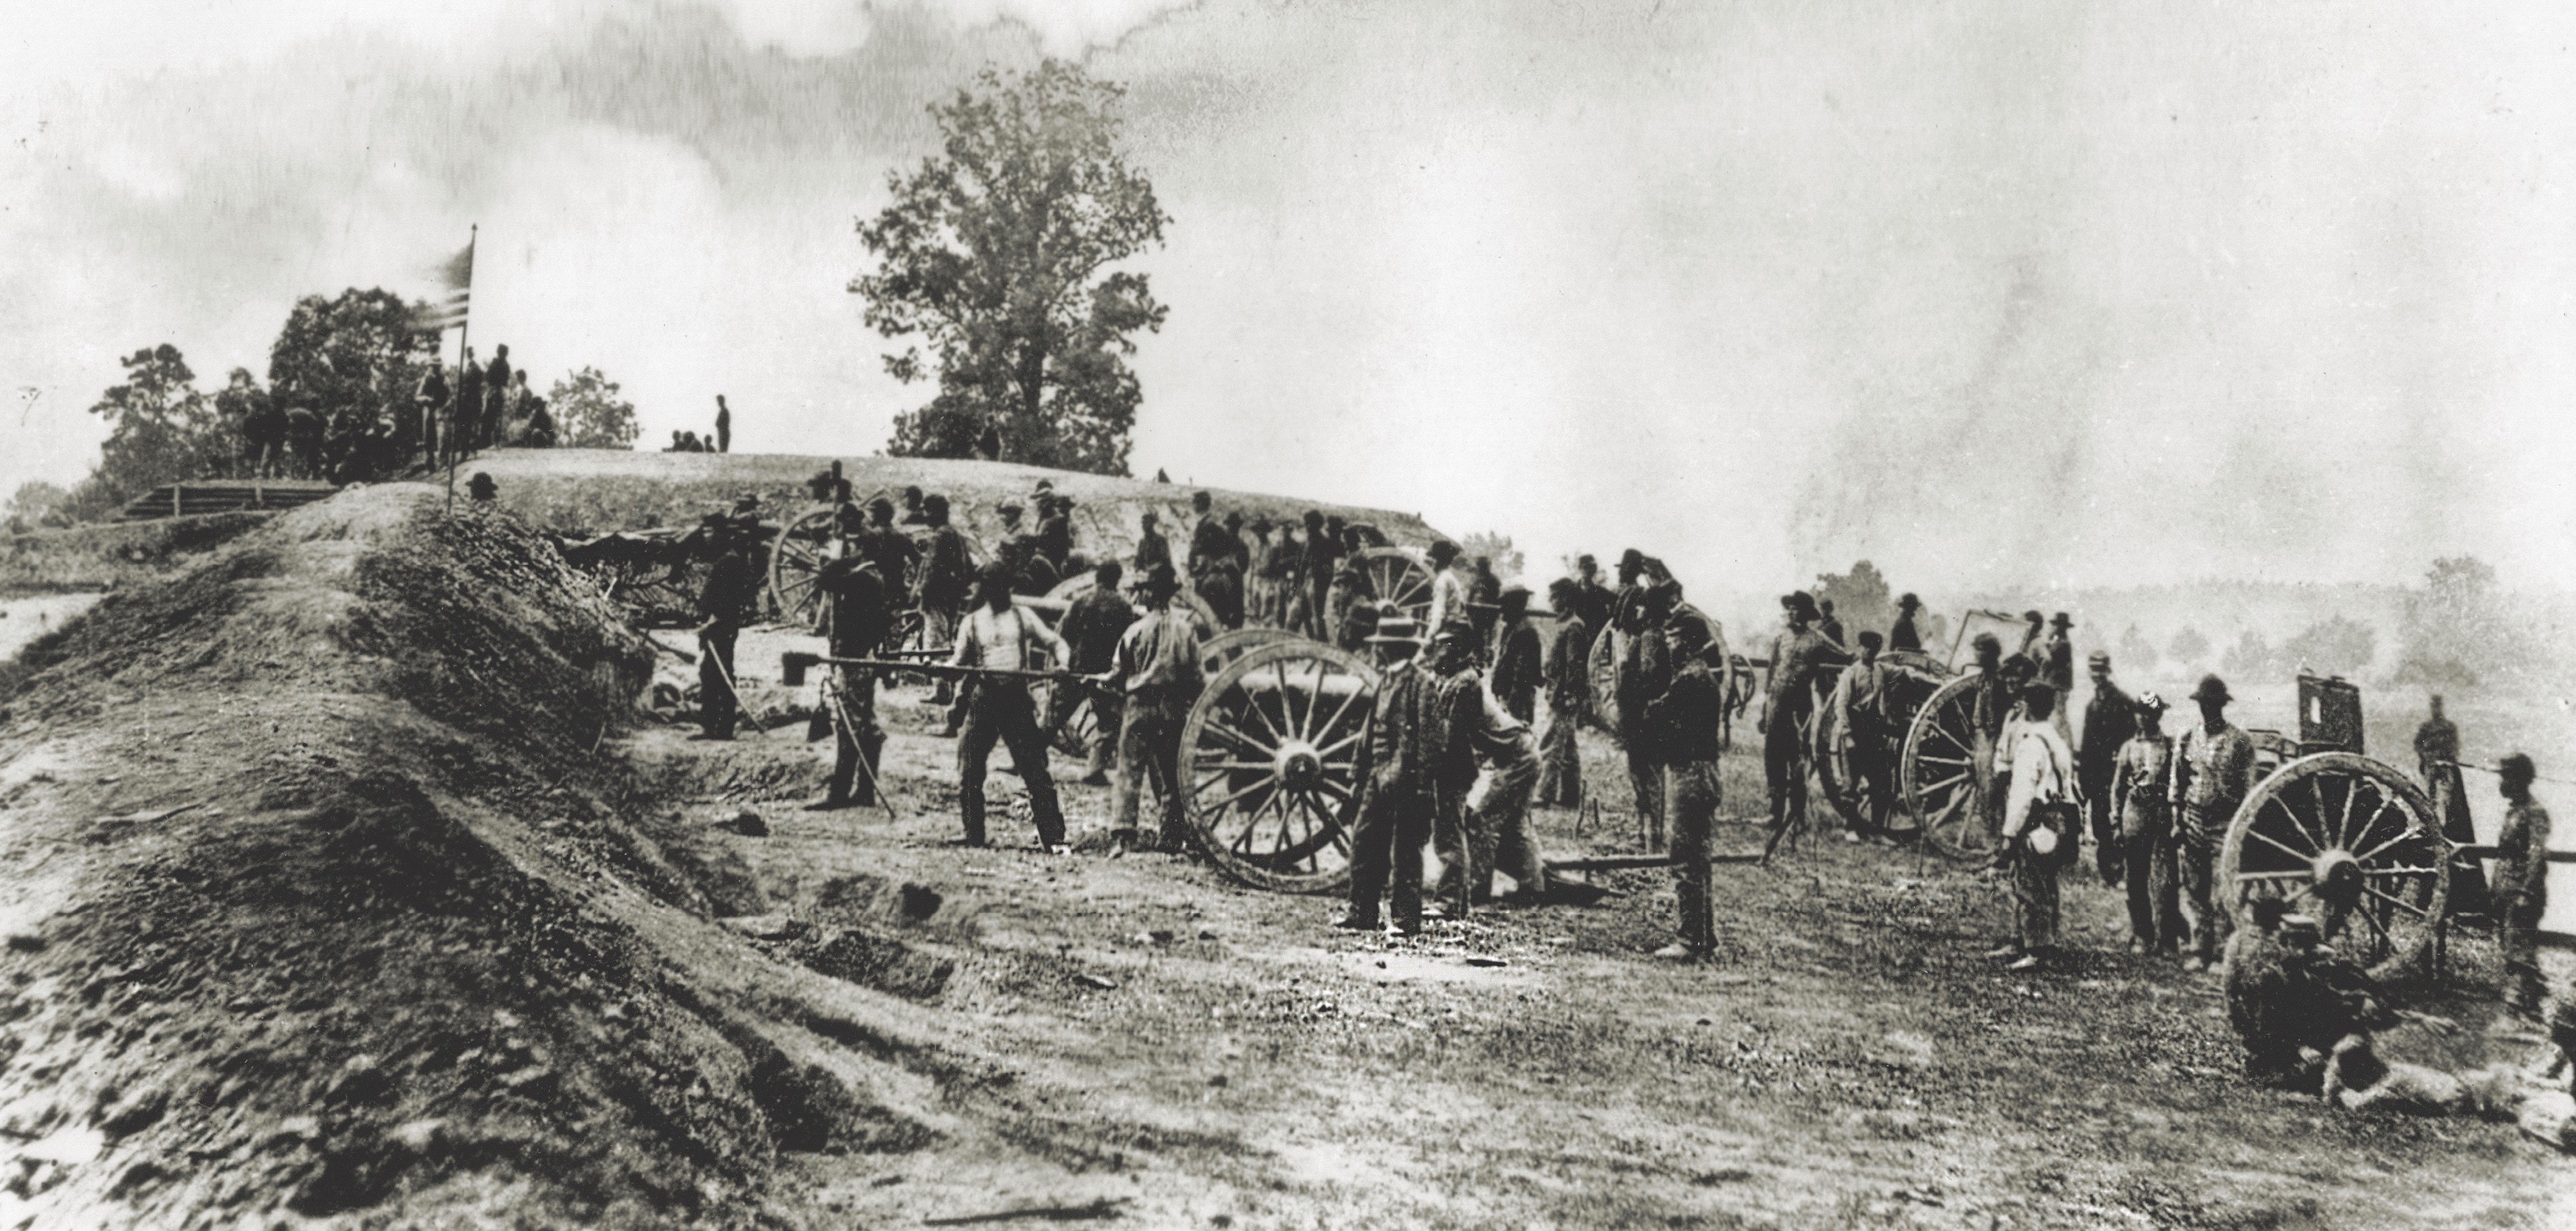 The 12th New York, shown in captured Confederate Battery 8, part of the Dimmock Line defending Petersburg, Va. A vigorous attack by the 22nd U.S. Colored Troops overran the battery on June 15, 1864. (Afro American Newspapers/Gado/Getty Images)